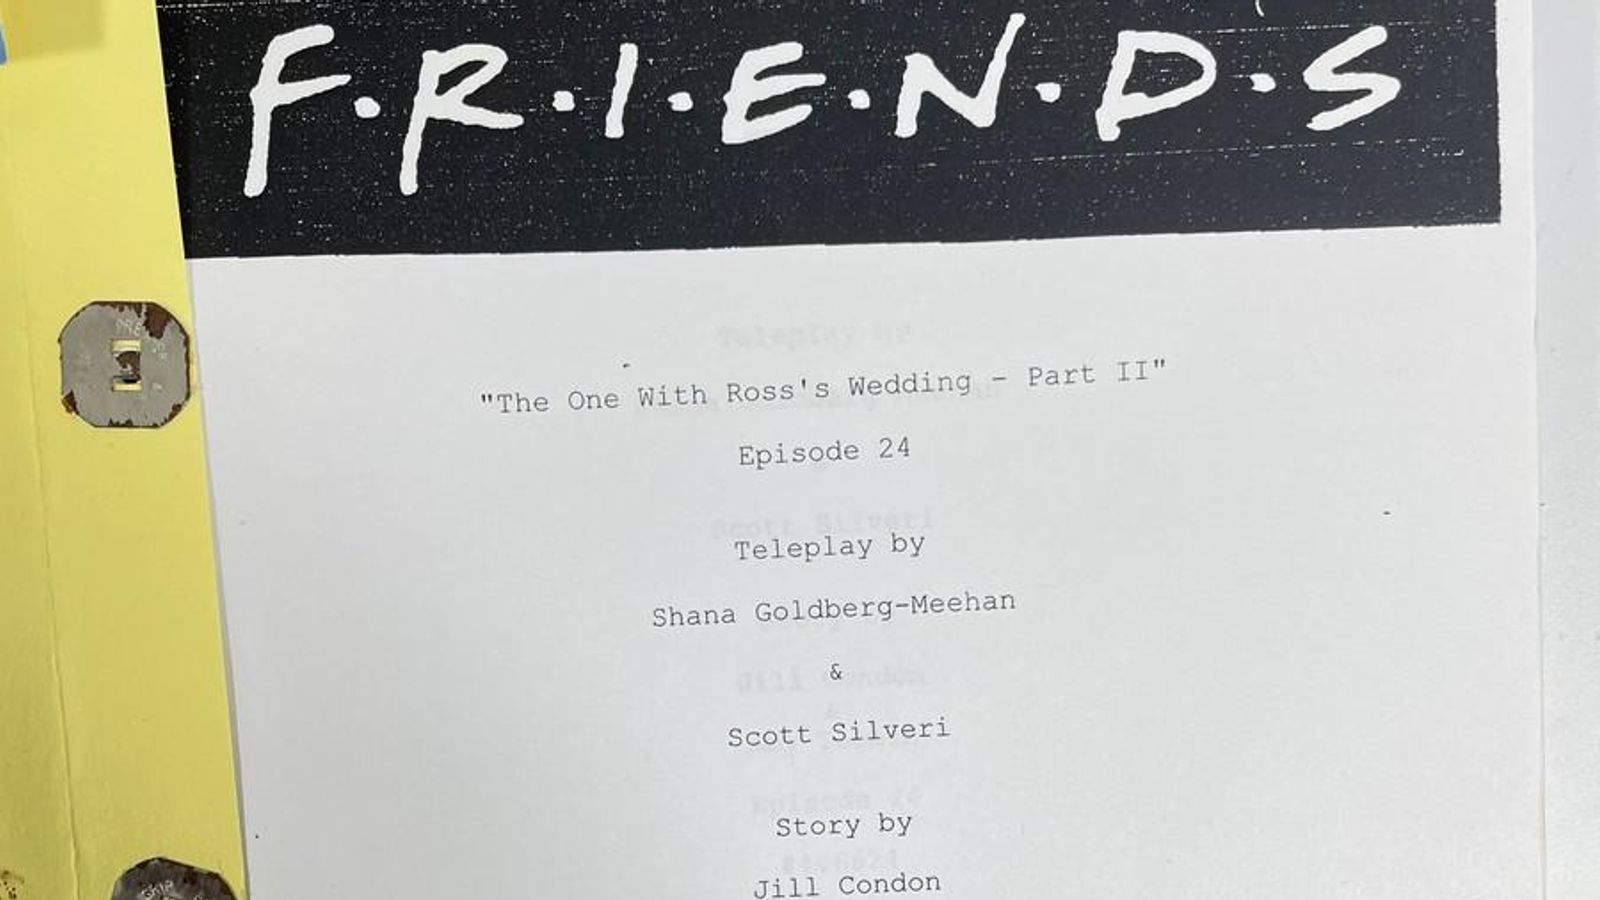 Friends scripts of iconic wedding episodes up for auction - 25 years after being found in London bin